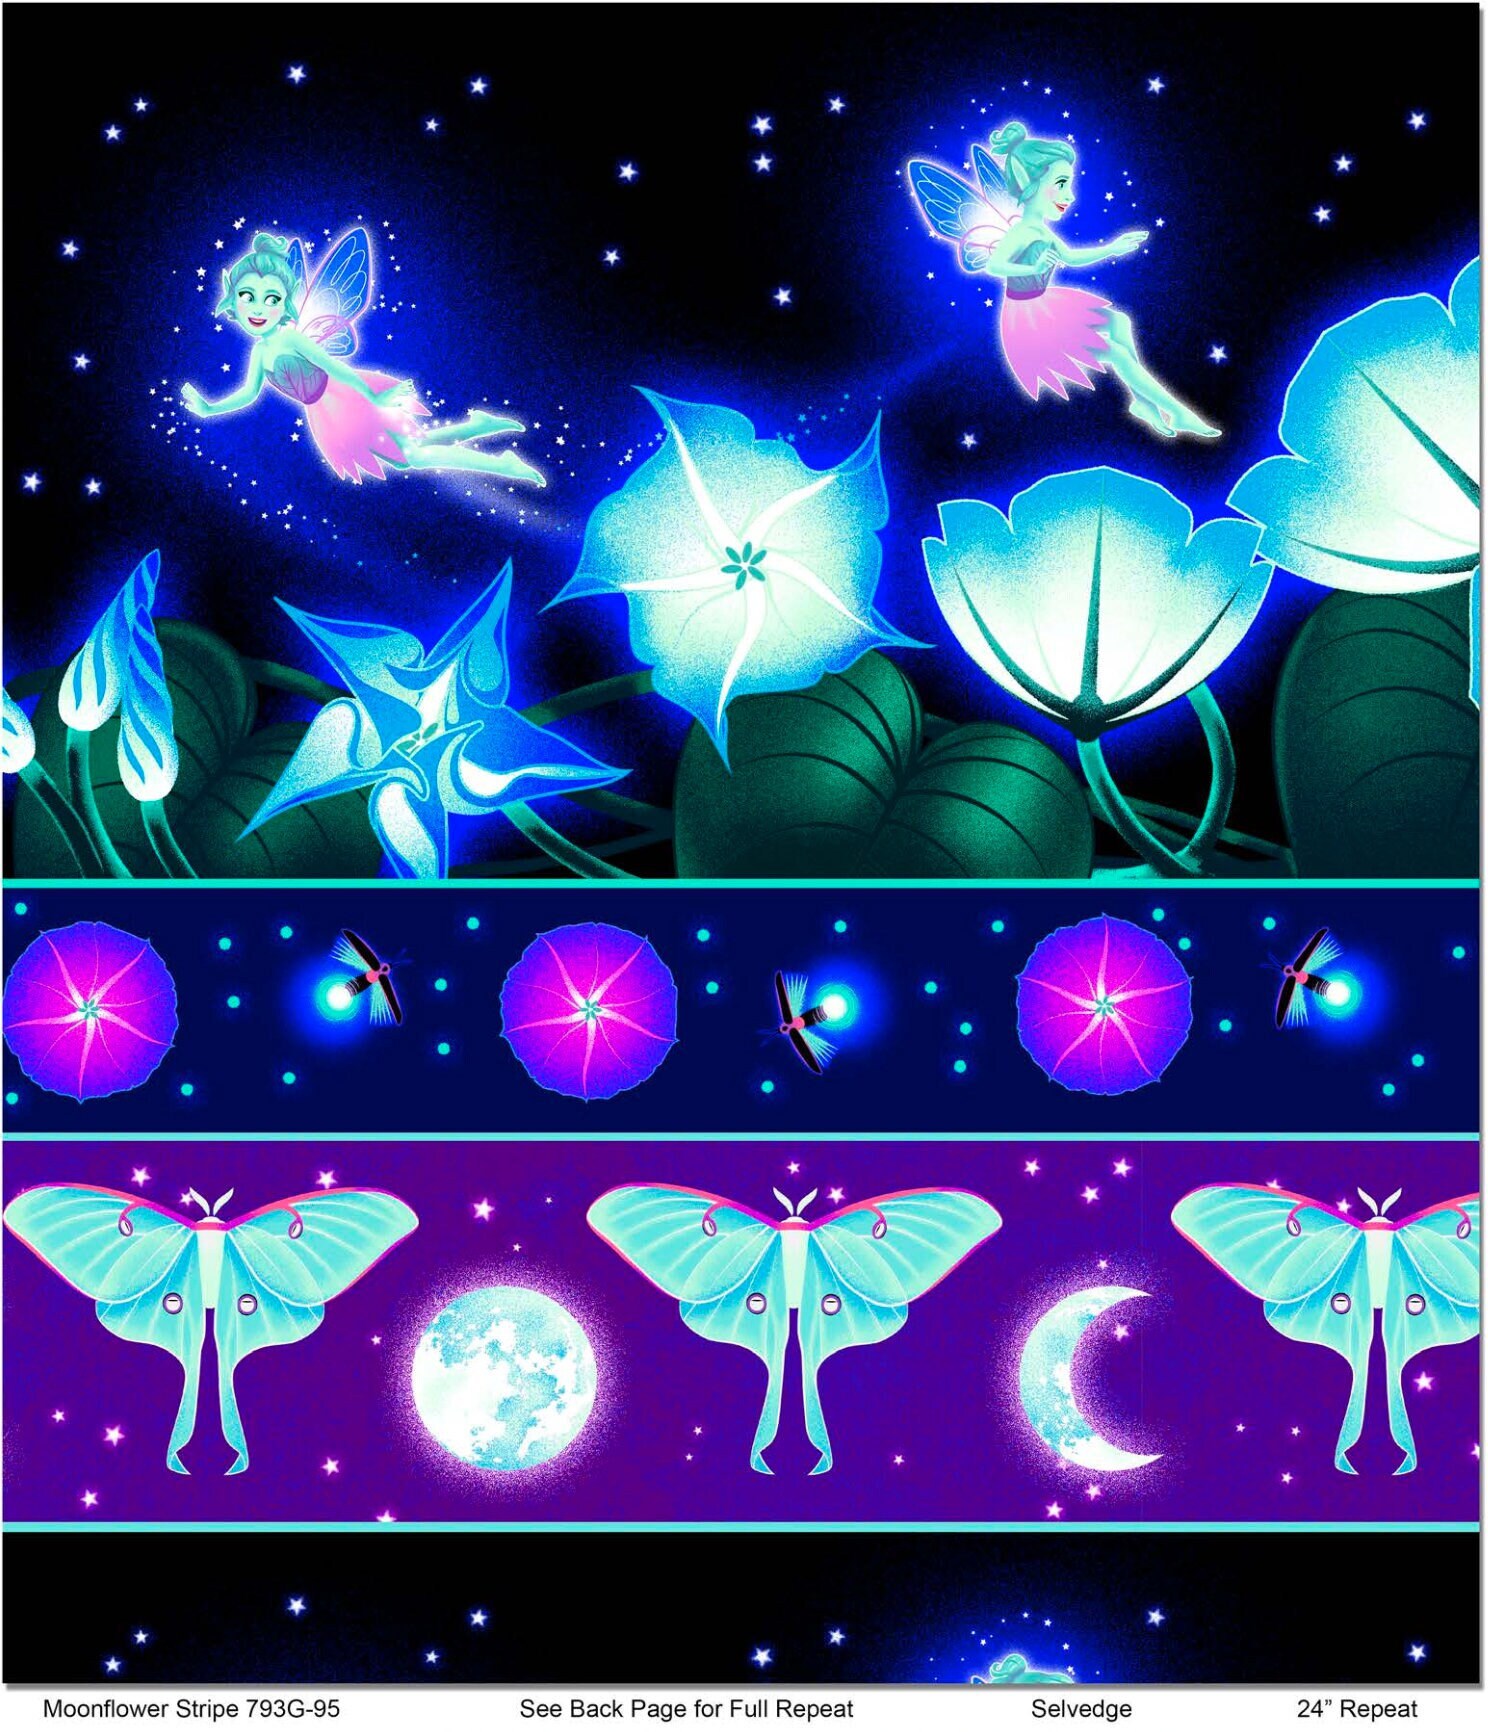 Purple Fairy Fabric, Glow in the Dark Fabric, by Henry Glass 